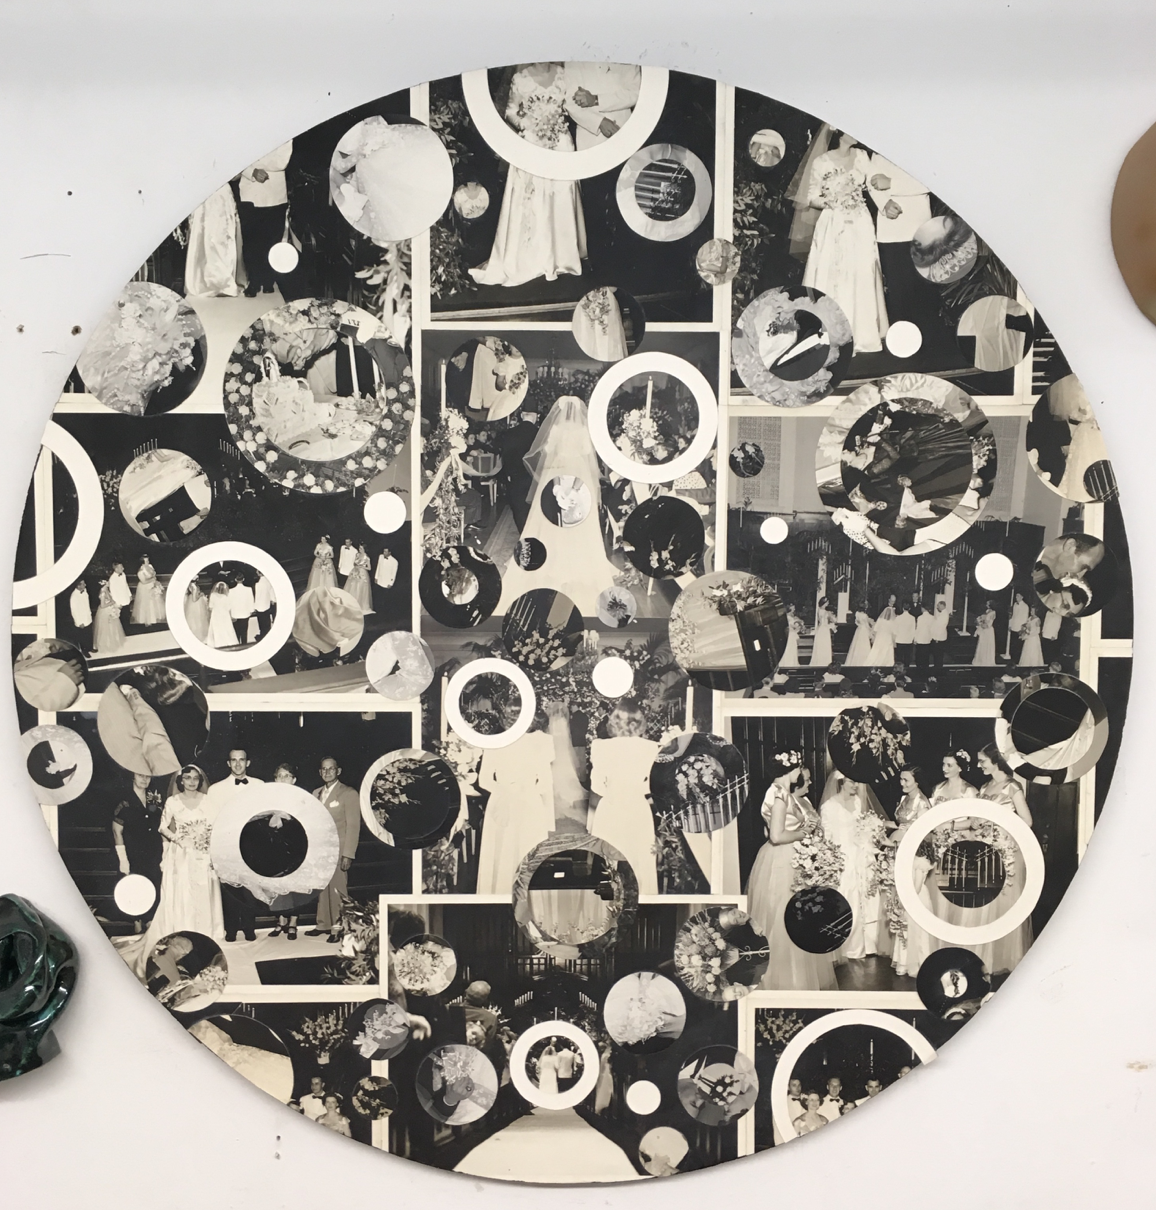  Mario Petrirena   Hoping,   2019 Photo collage on board 30 in. diameter YIMBY price $1,500 